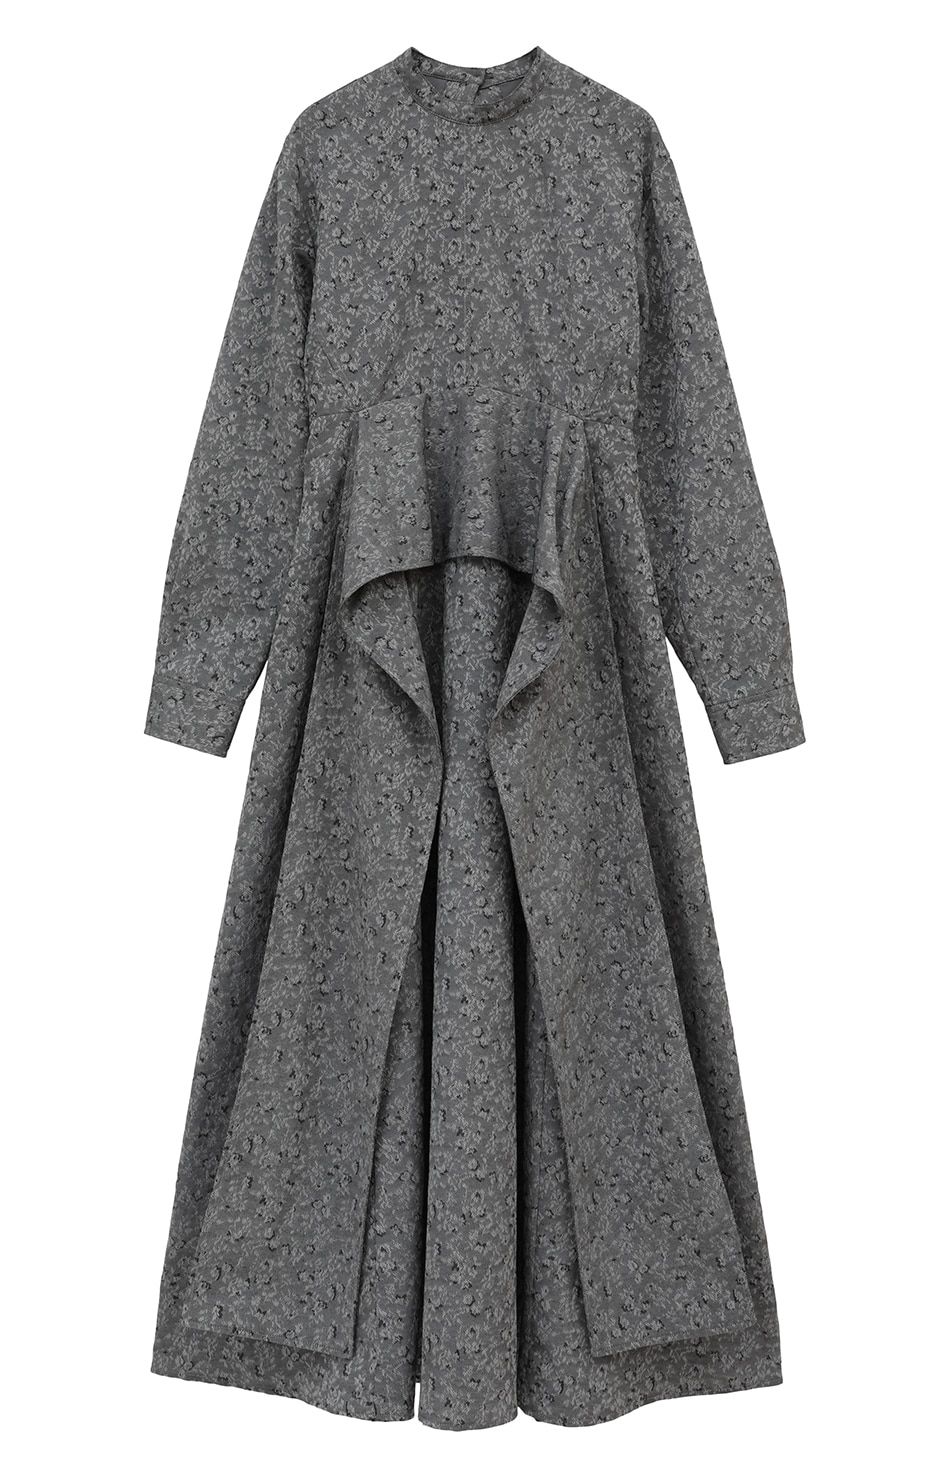 CLANE - ジャガードワンピース - 2WAY JAQUARD ONEPIECE - GREY